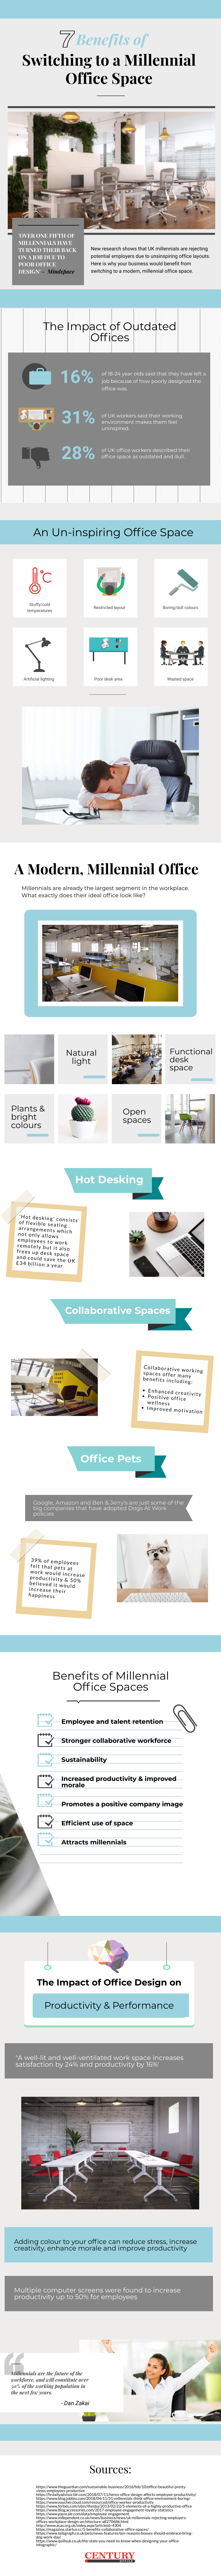 century-office-millennial-office-infographic-redownload